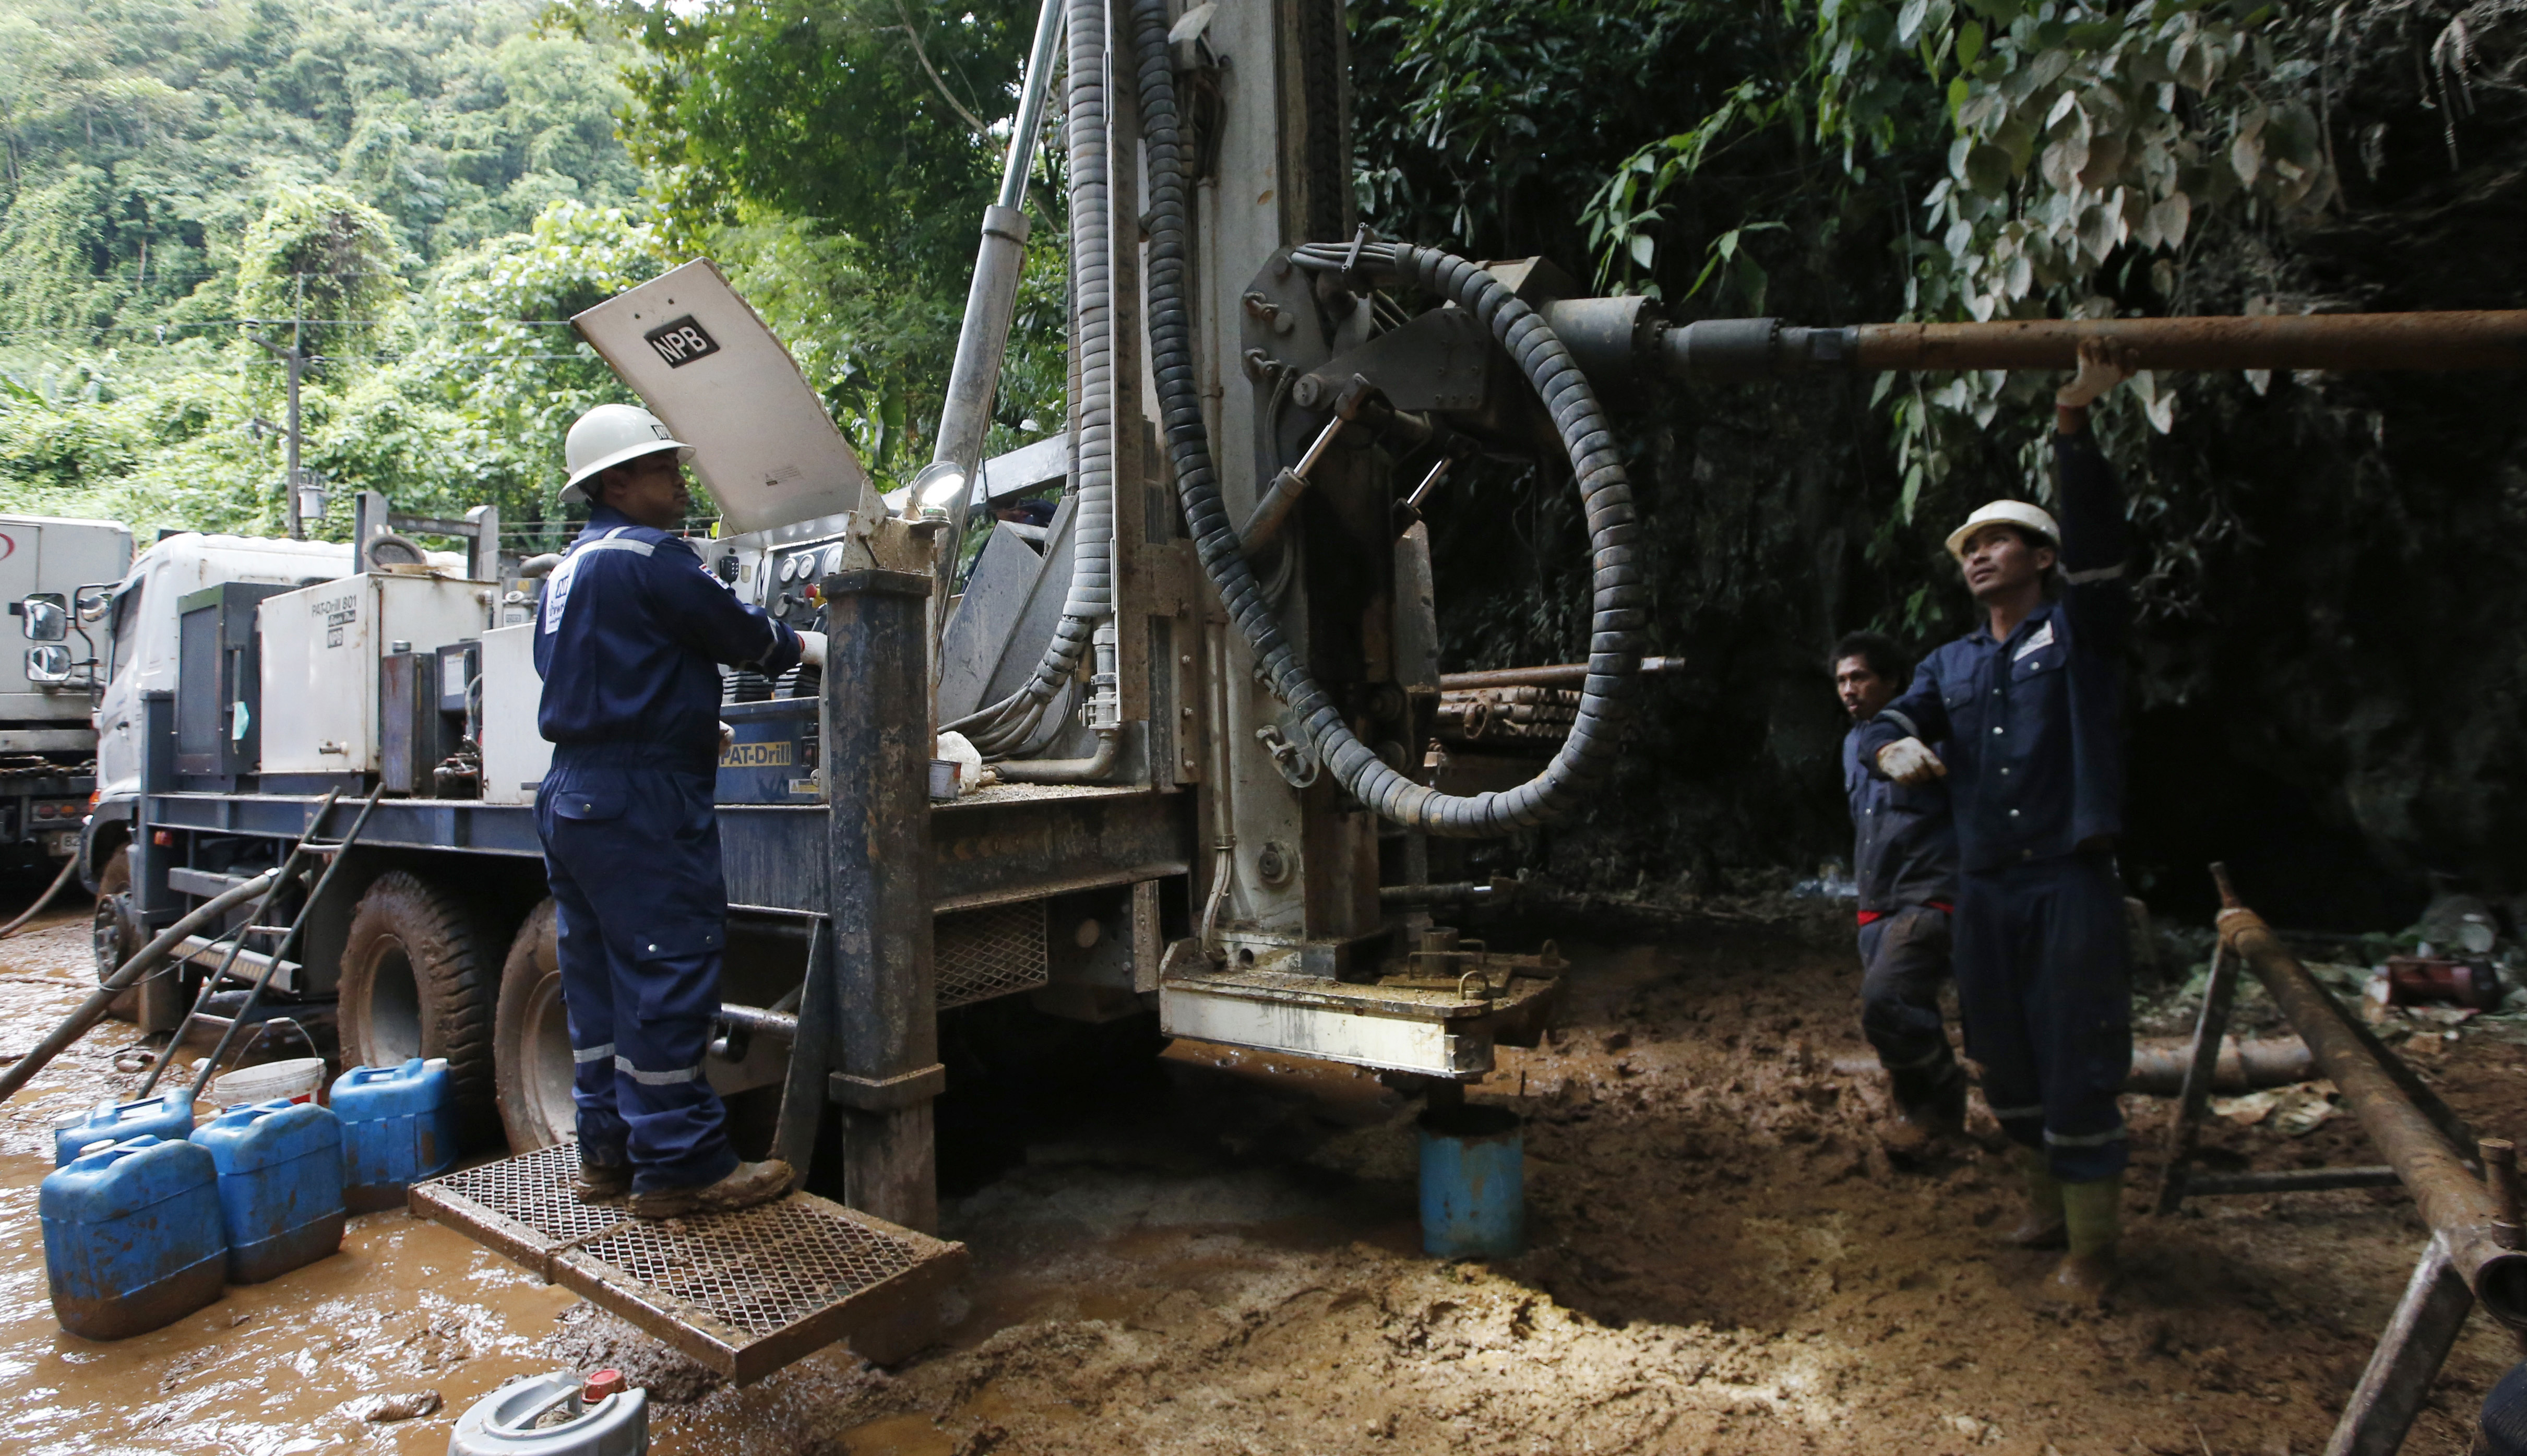 Workers operate a machinery in attempts to drain the water from a cave where 12 boys and their soccer coach have been missing, in Mae Sai, Chiang Rai province in northern Thailand, Friday, June 29, 2018. Floodwaters have reached near the entrance of the cave despite attempts to drain the water so rescuers can search farther into the complex. (AP Photo/Sakchai Lalit)